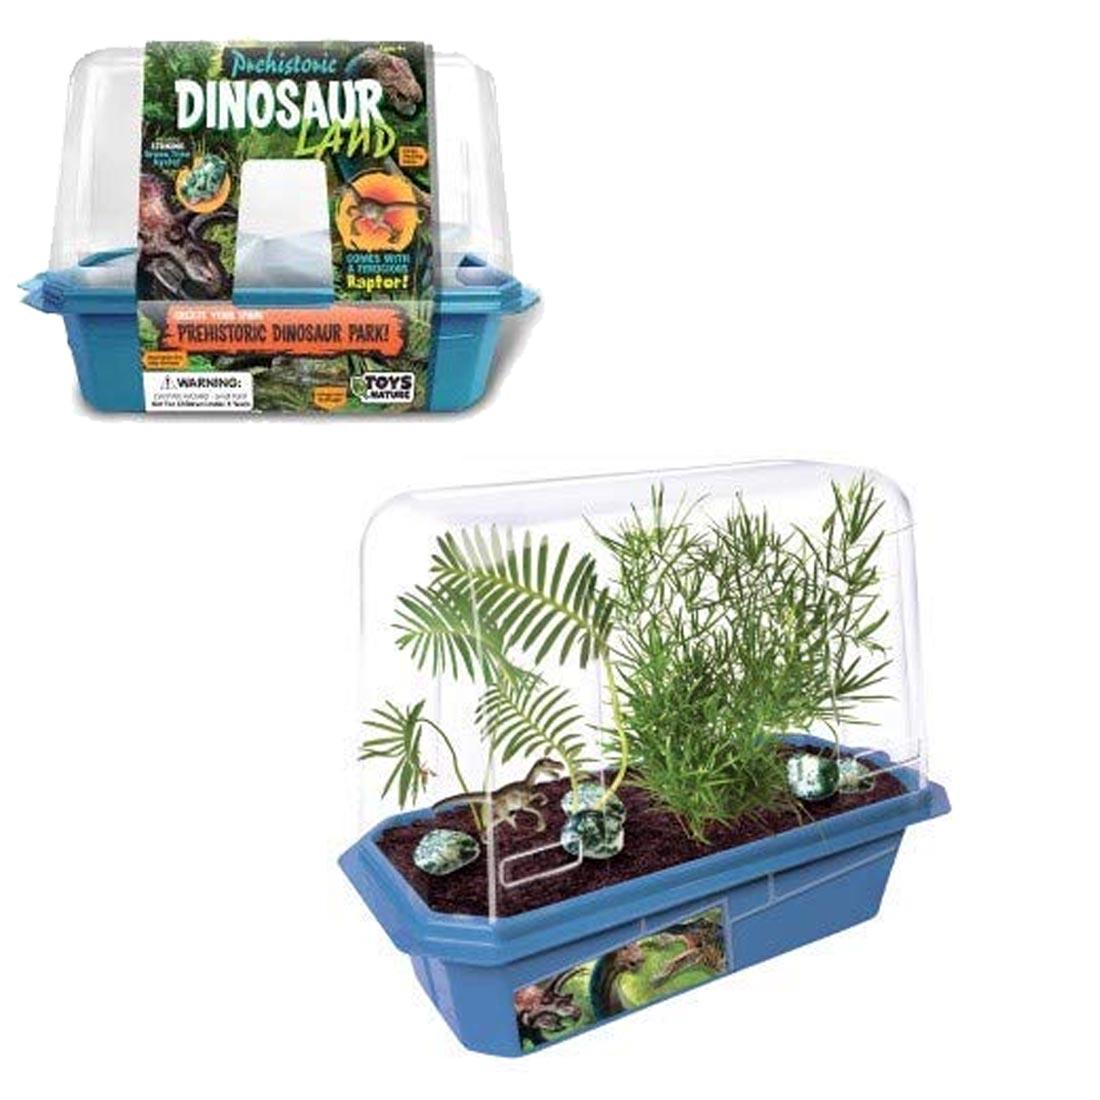 Prehistoric Dinosaur Land Package plus an example of one with grown plants